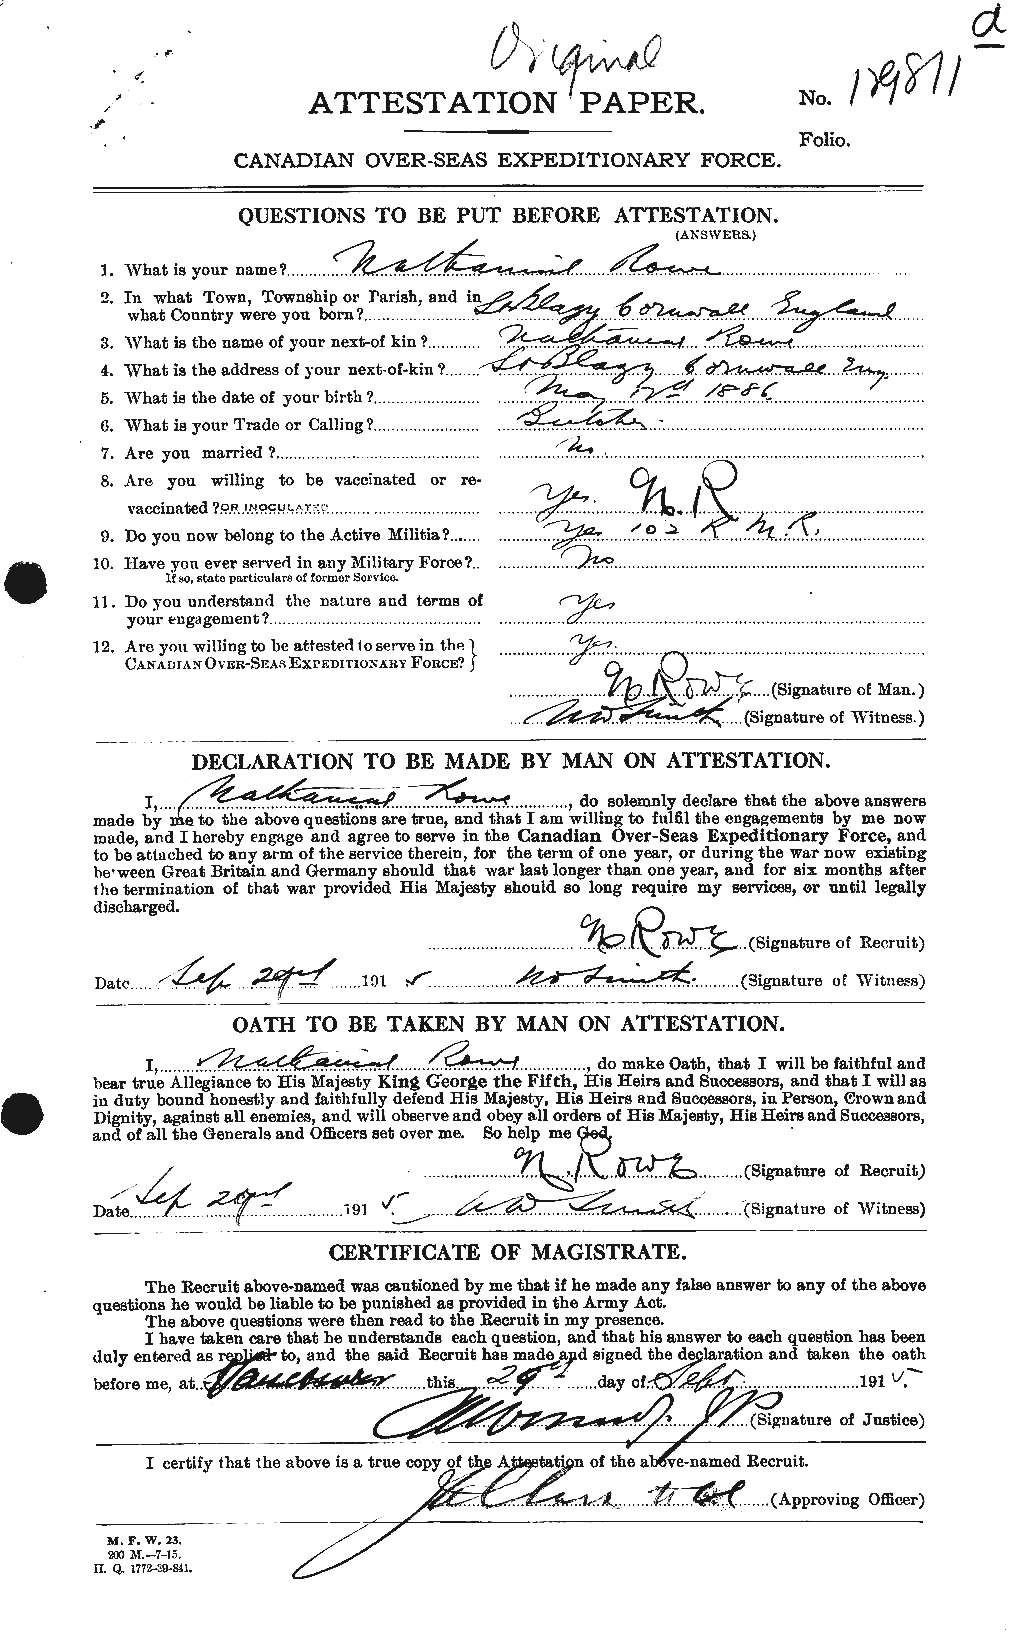 Personnel Records of the First World War - CEF 615953a